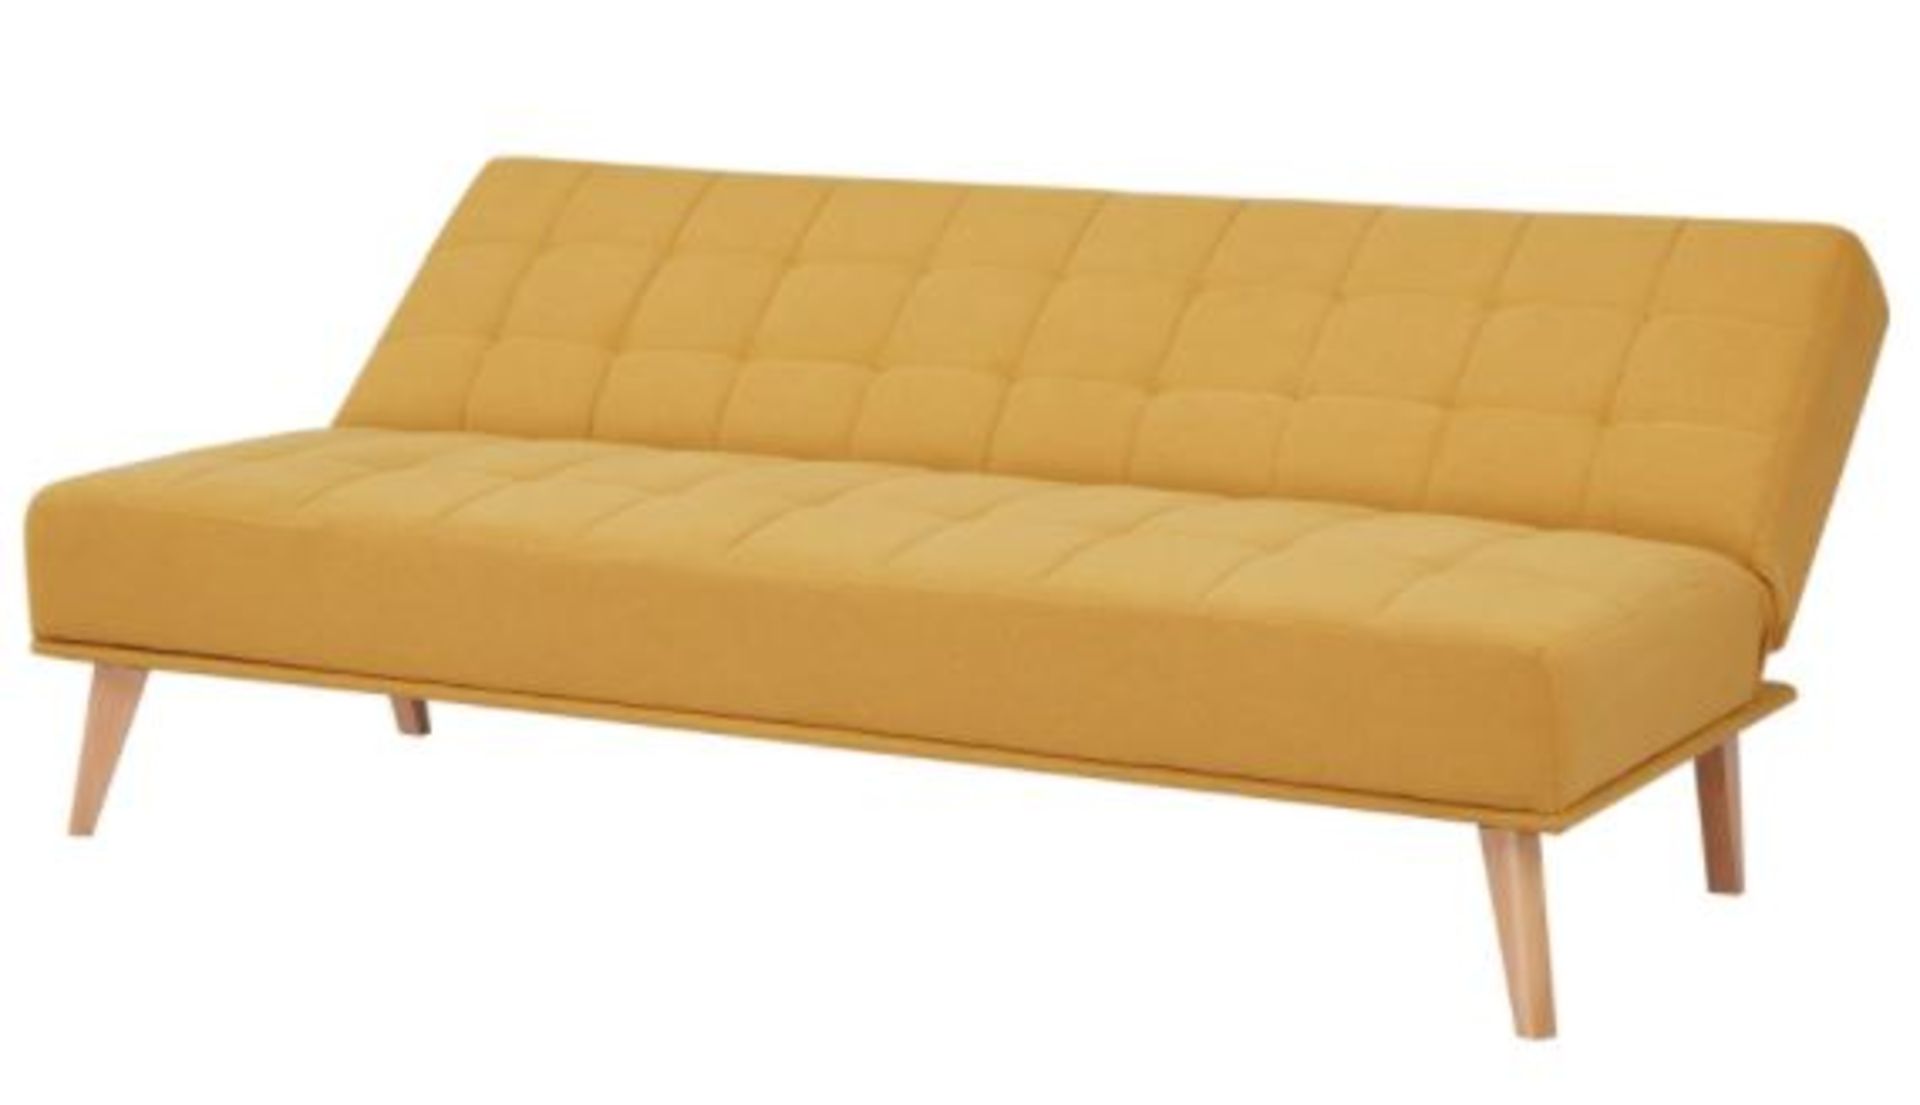 1 X Click Clack Kelly Sofa Bed Ochre. Wooden Frame With Solid Birchwood Legs. 100% Polyester Fabric - Image 5 of 9